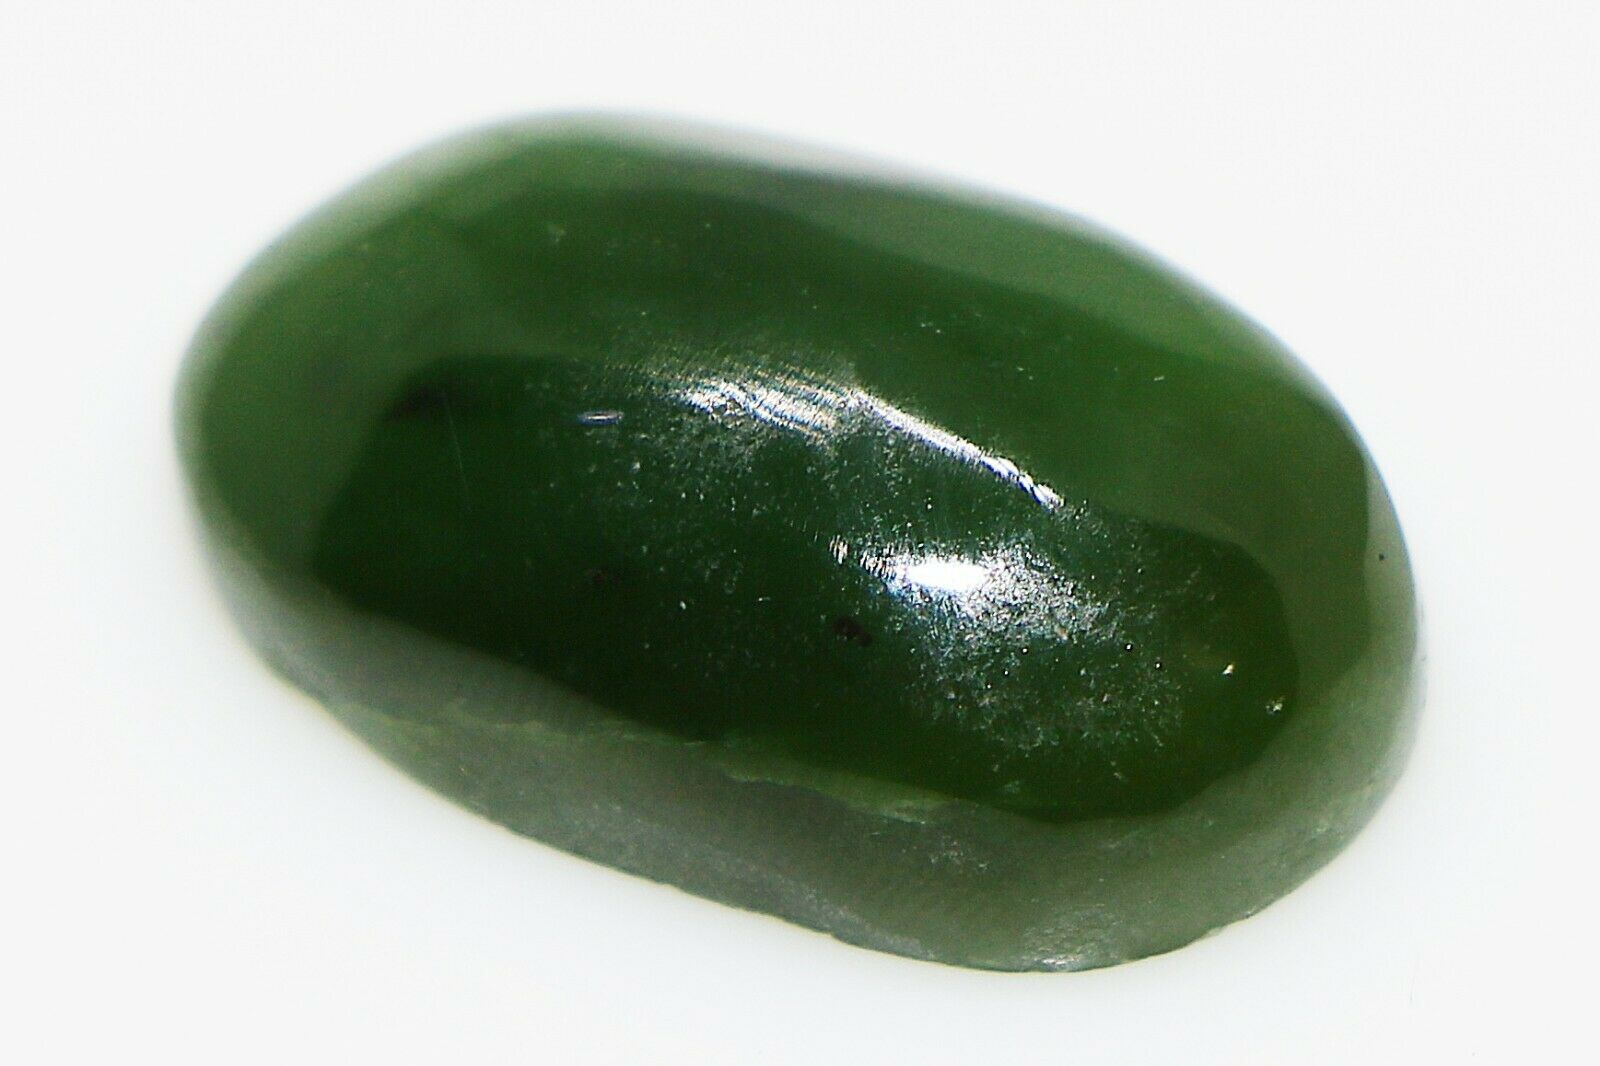 Natural Rare Nephrite Jade Stone Loose Oval Cabochon With Certificate -18.24ct